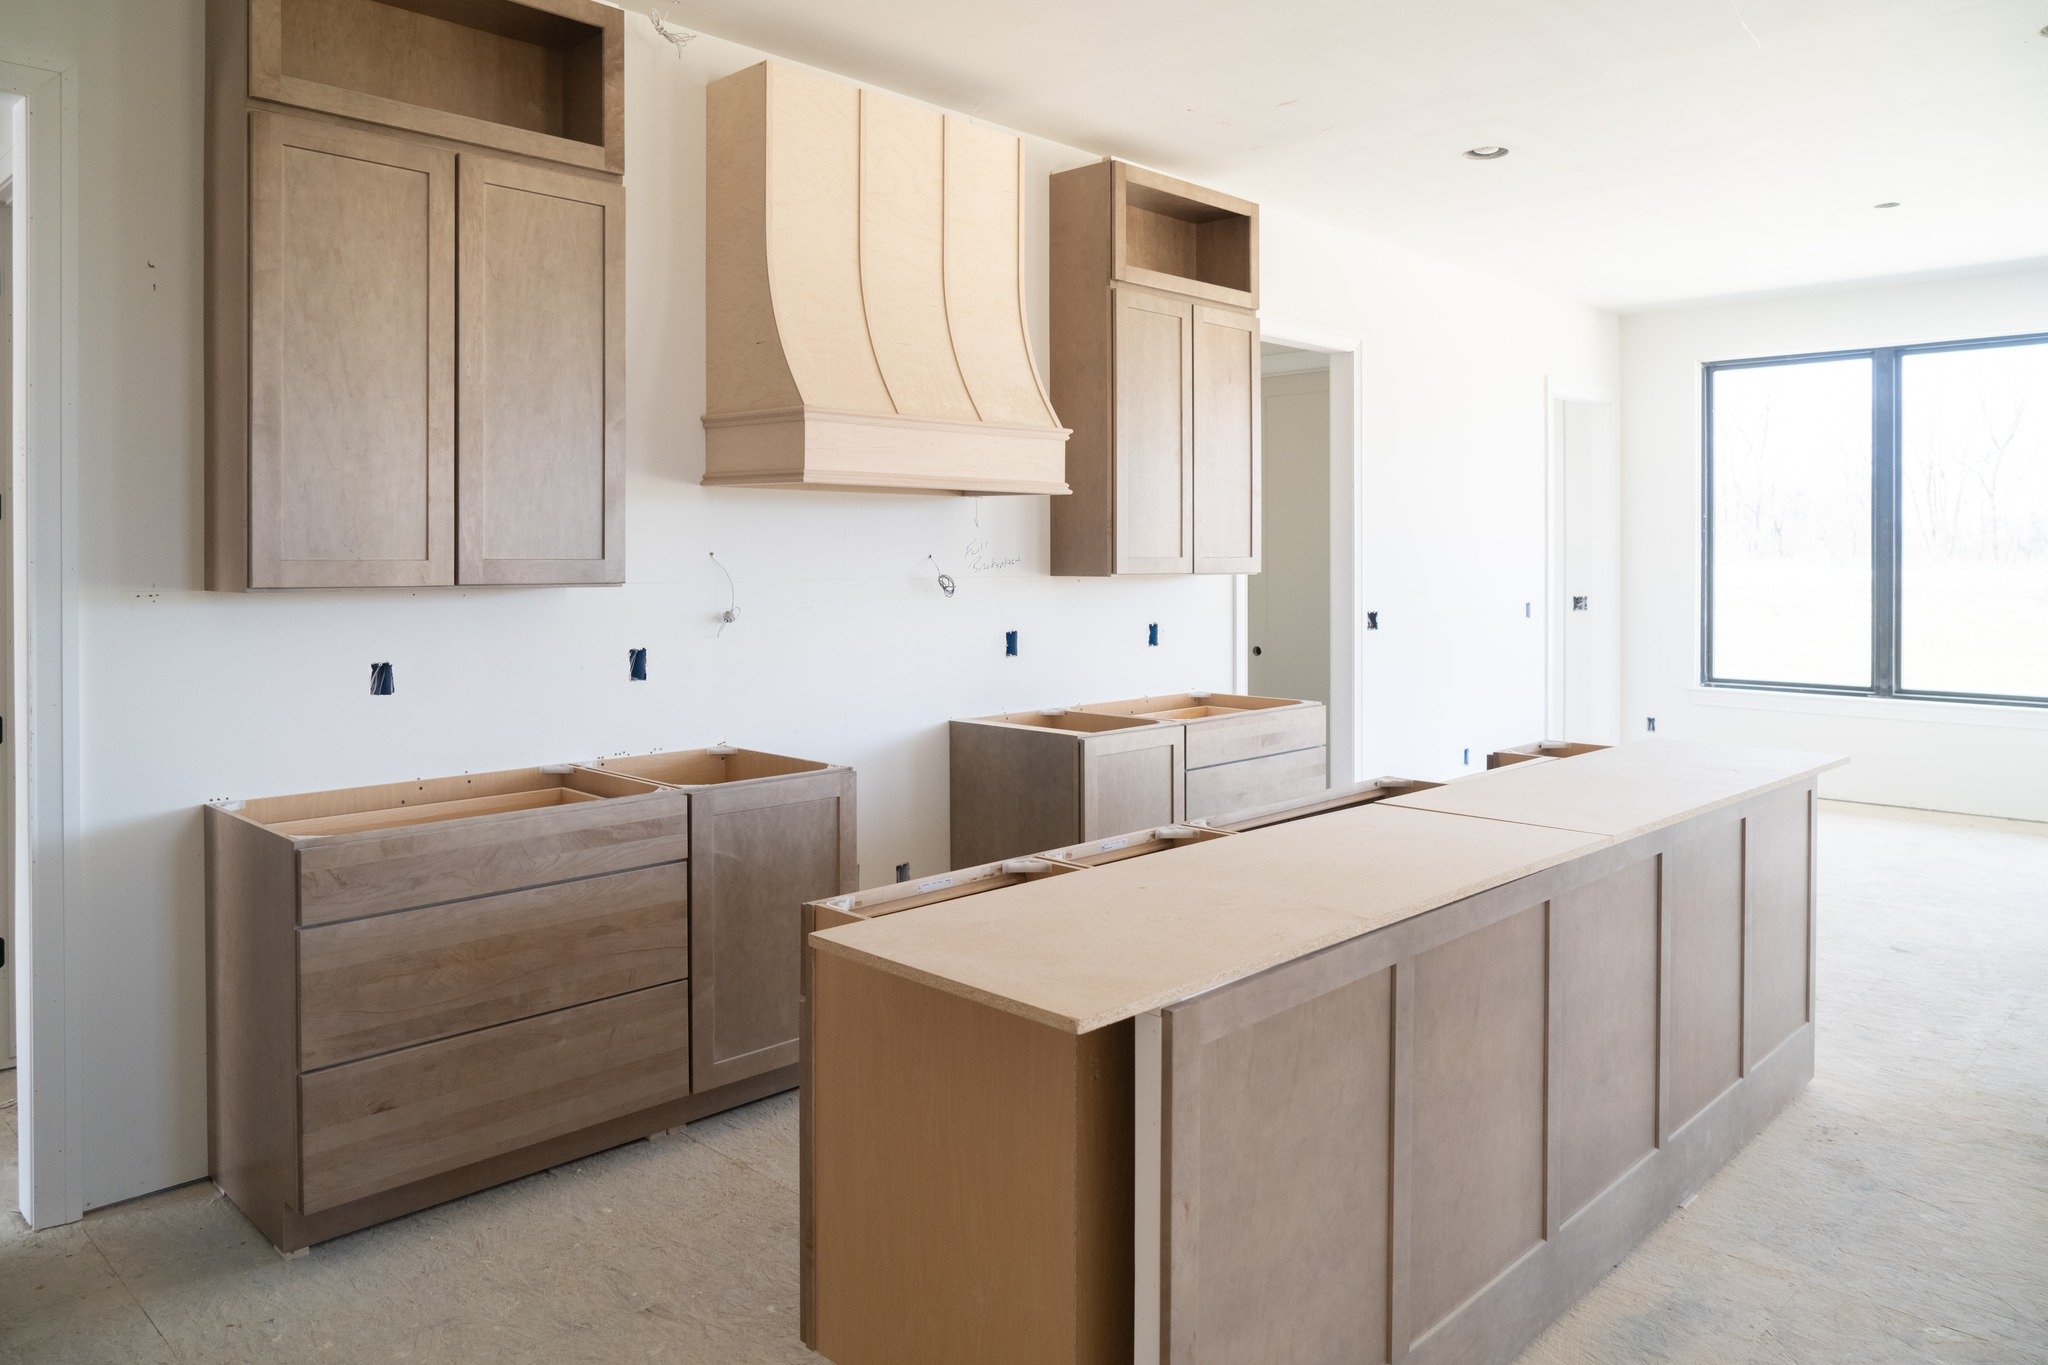 Come visit the hottest new living community in Washington Township, MI! Speak with one of our new construction specialist this weekend at our open house from 12 - 4 PM.  This living community has every you need to have peace of mind. Did we mention i